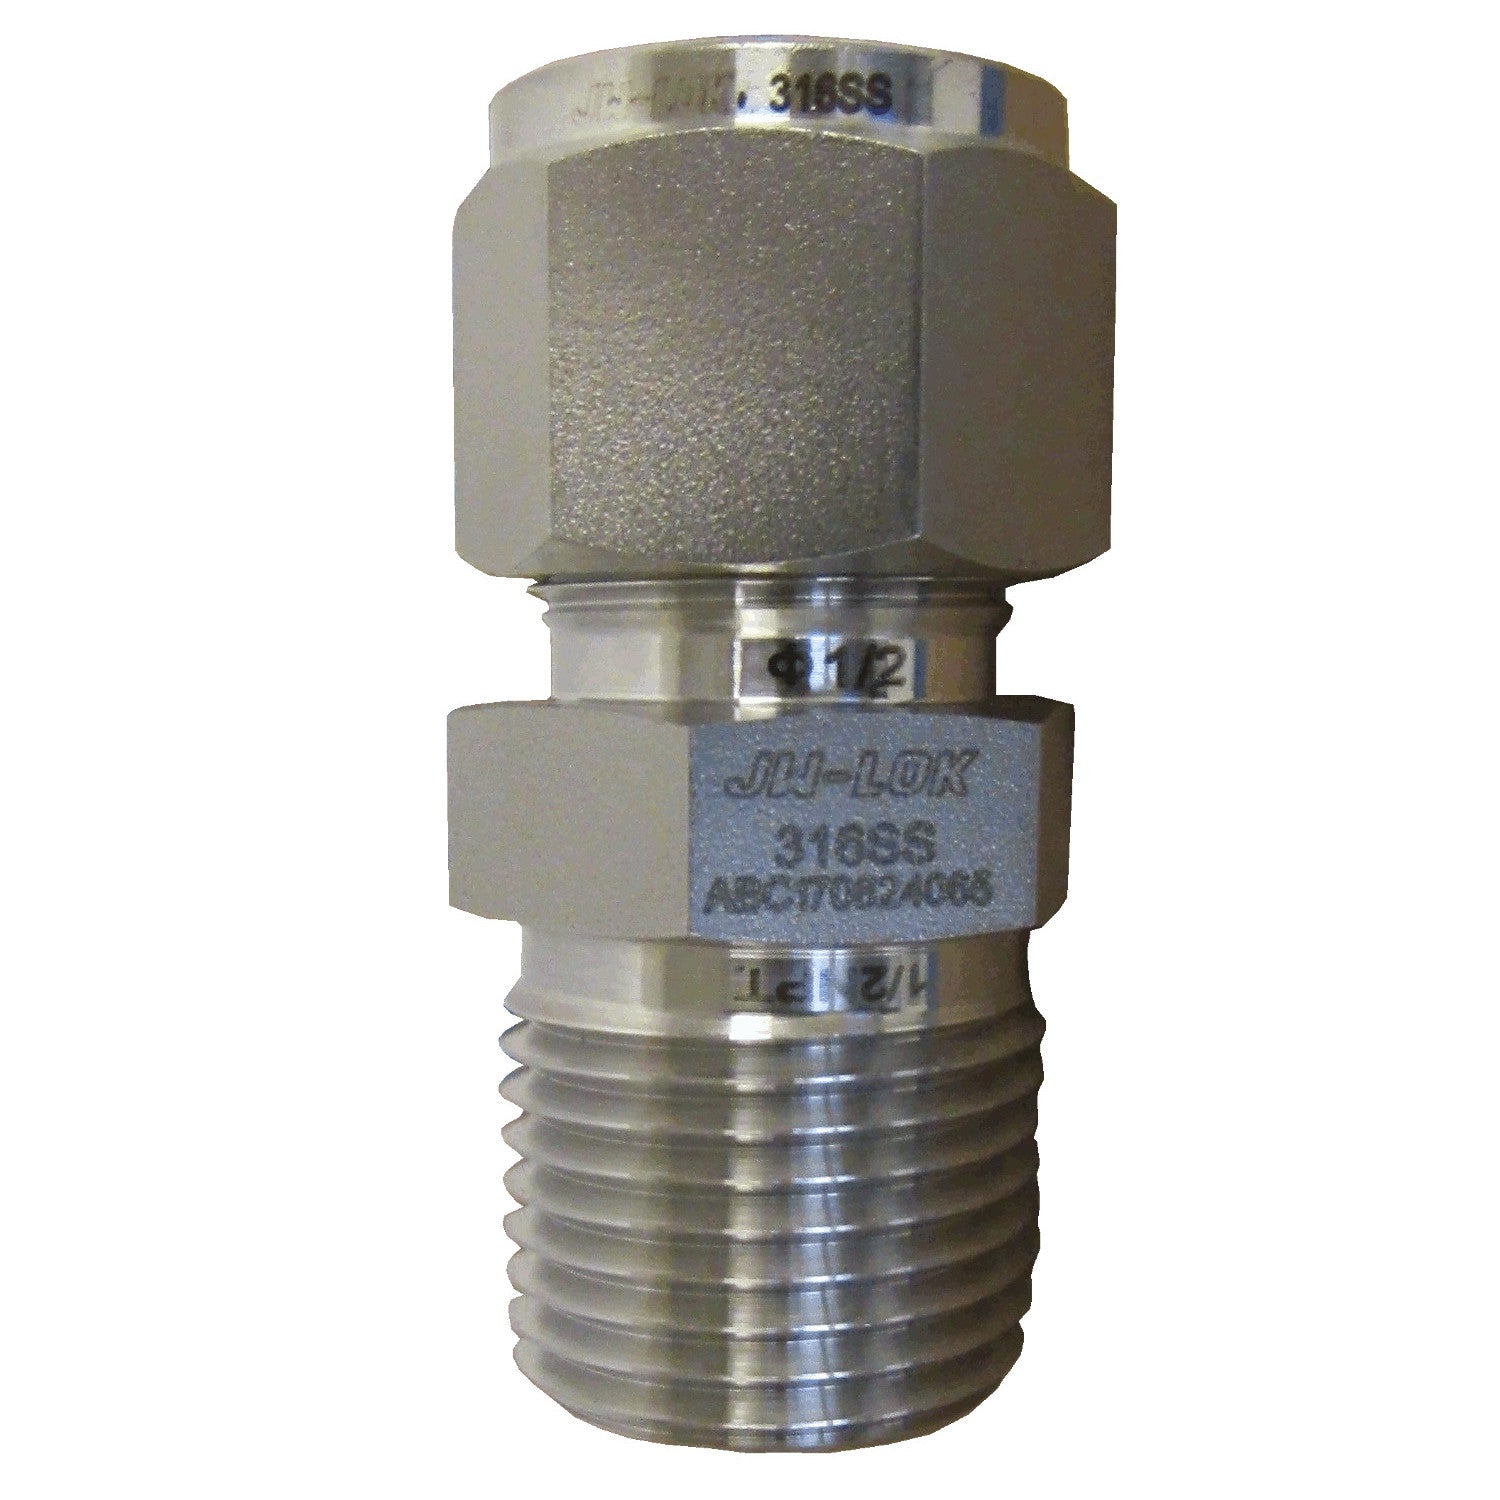 Stainless Steel Compression Fittings - AN Adapters - 1/2 Tube OD x 1/2 FAN